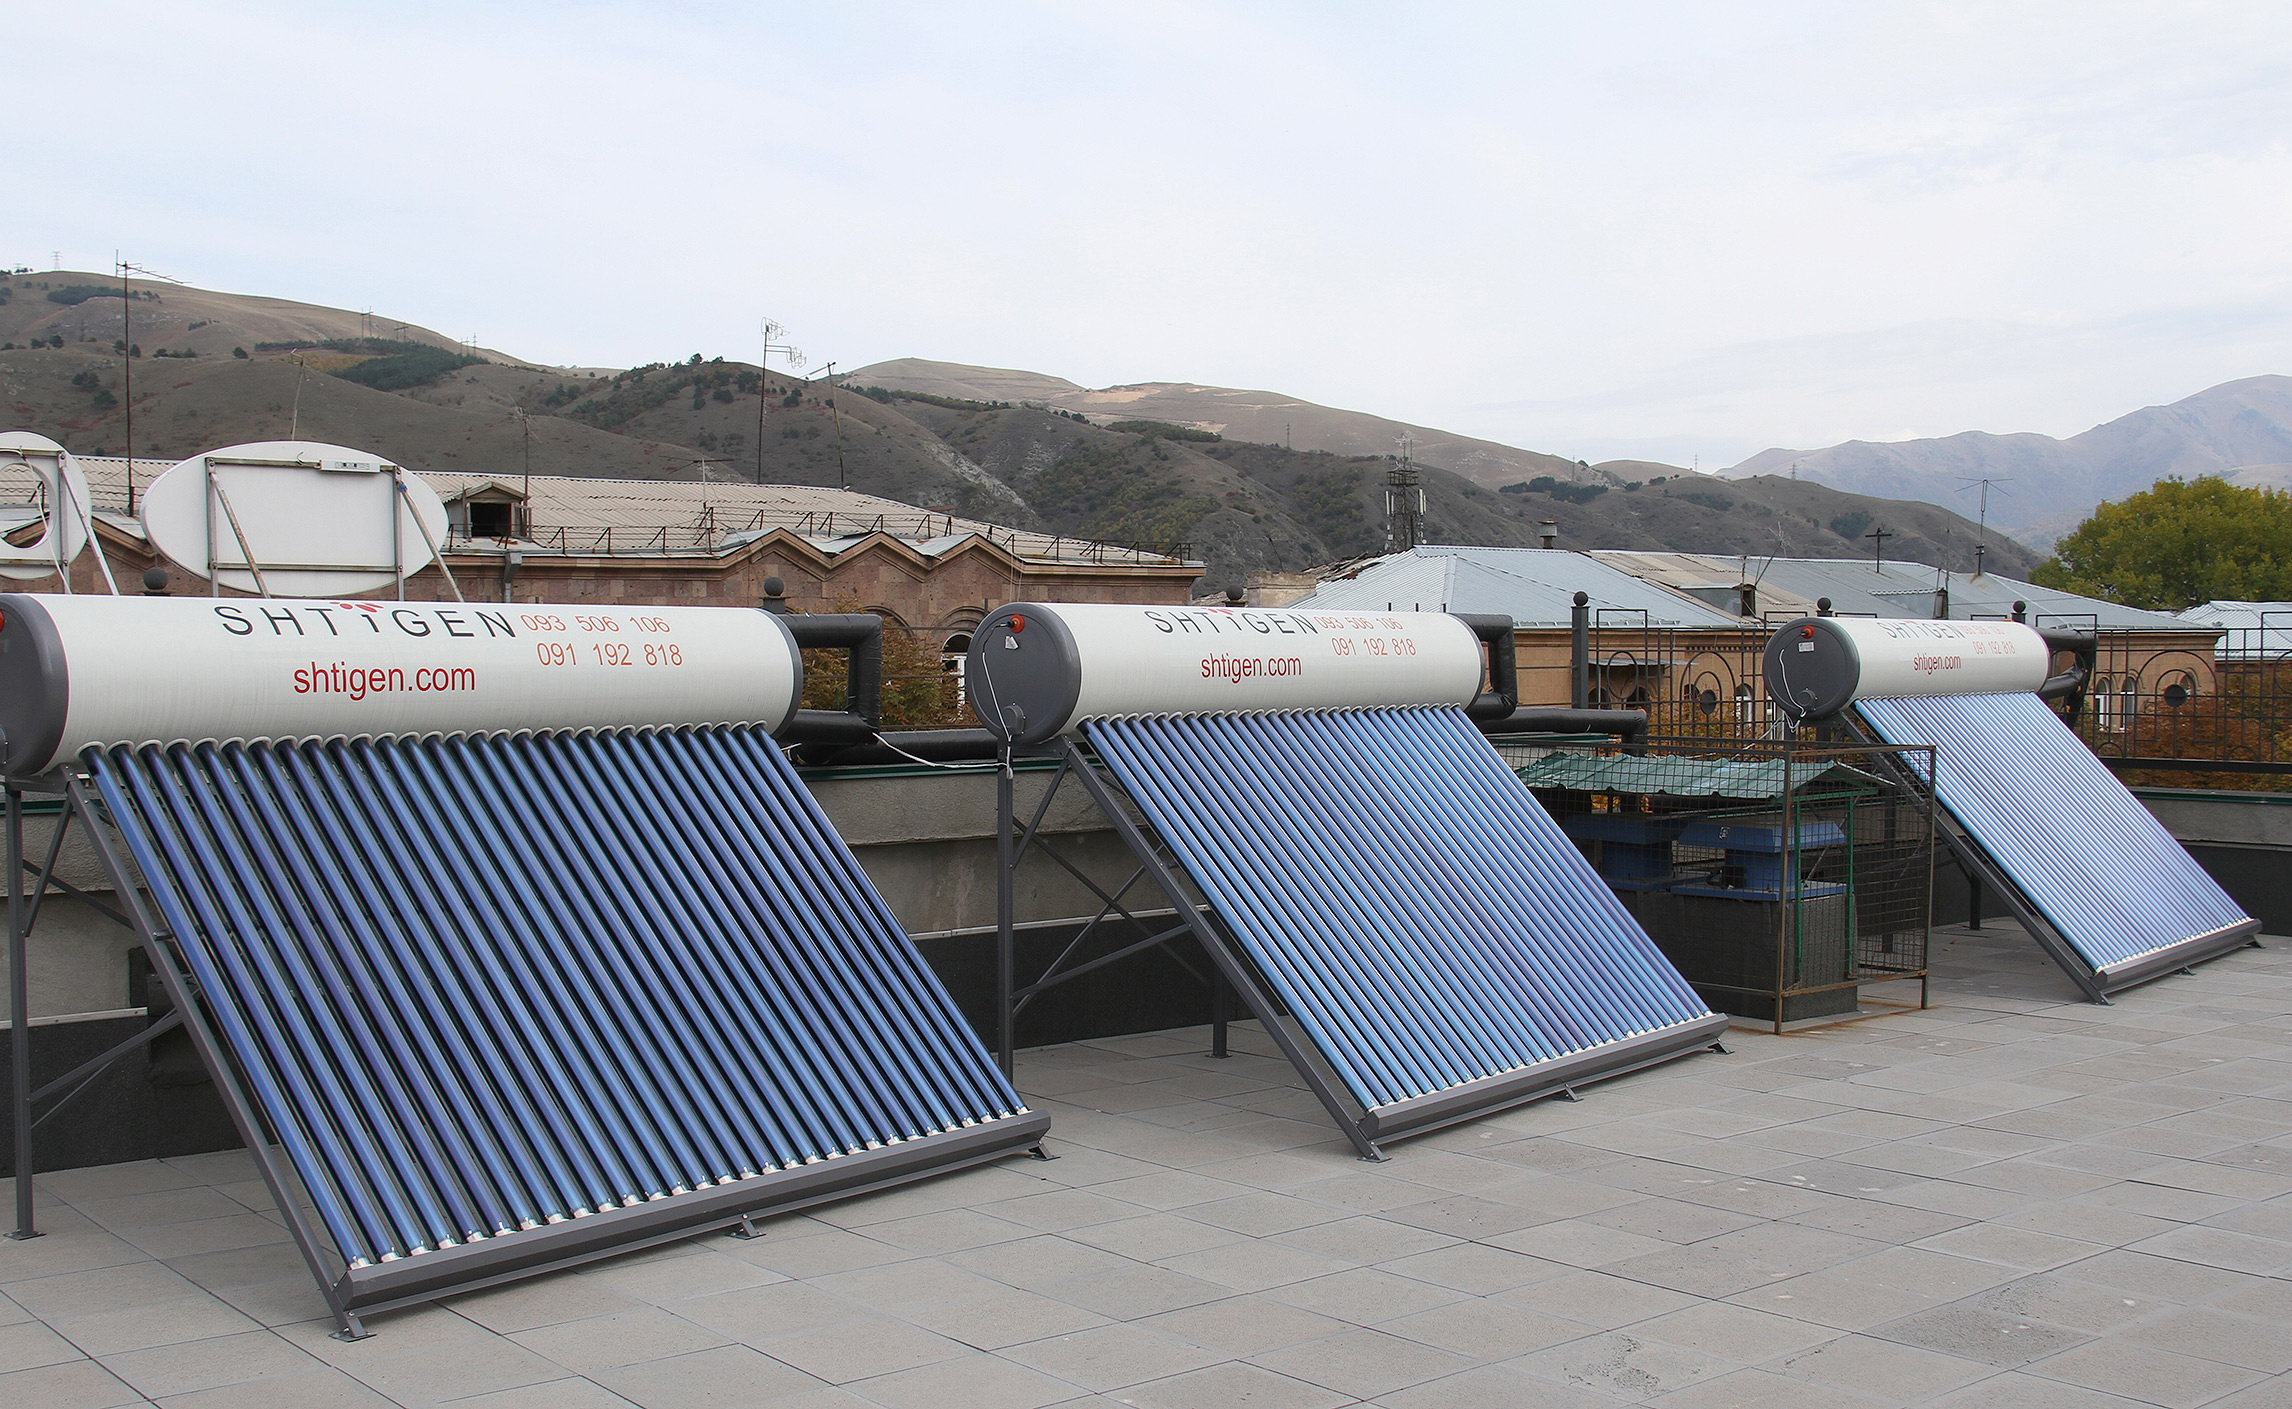 ACBA-CREDIT AGRICOLE BANK helps install solar water heaters at Vanadzor branch of Orran charity organization